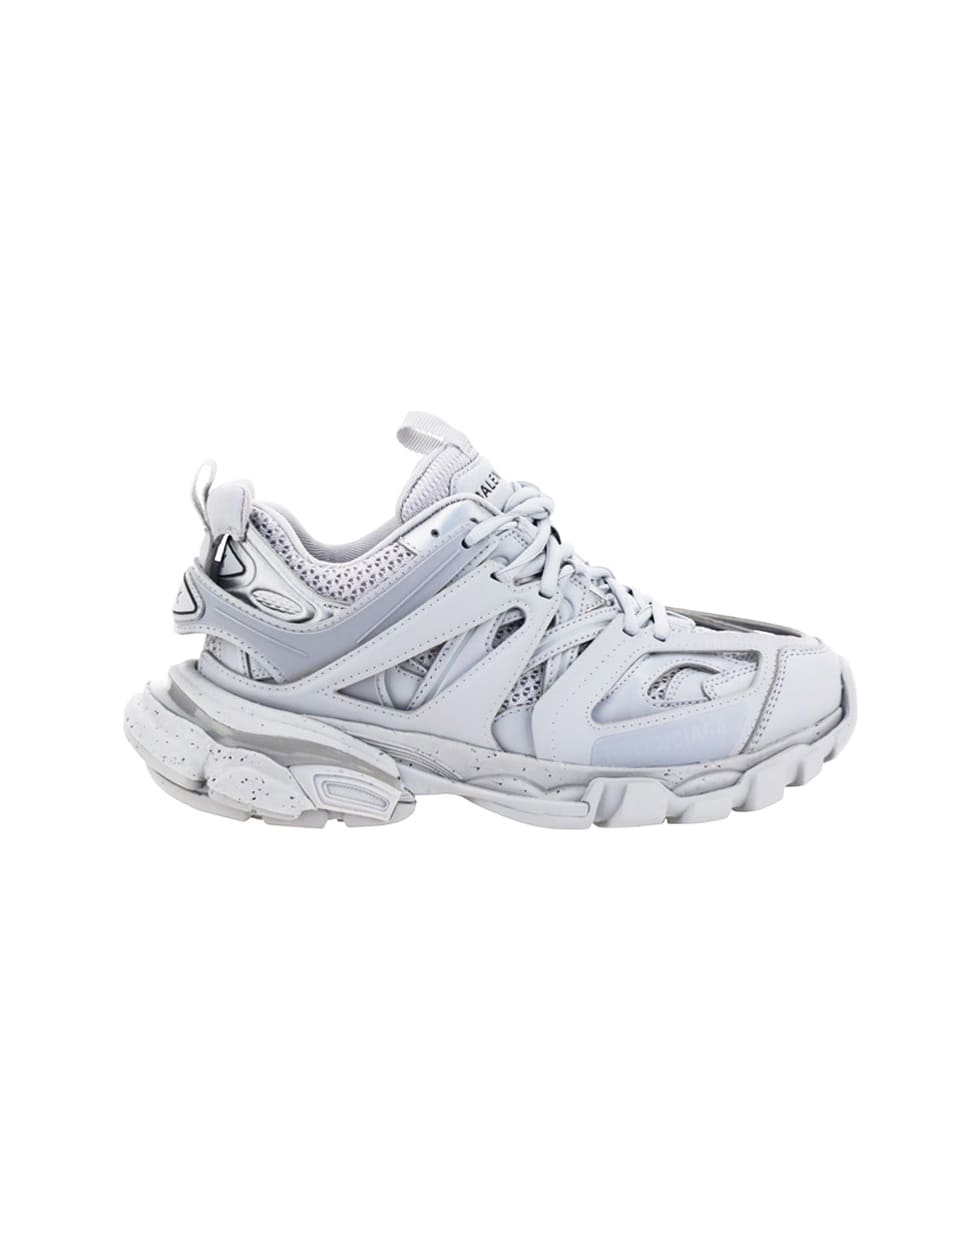 Balenciaga Track Sneakers - Recycled light grey